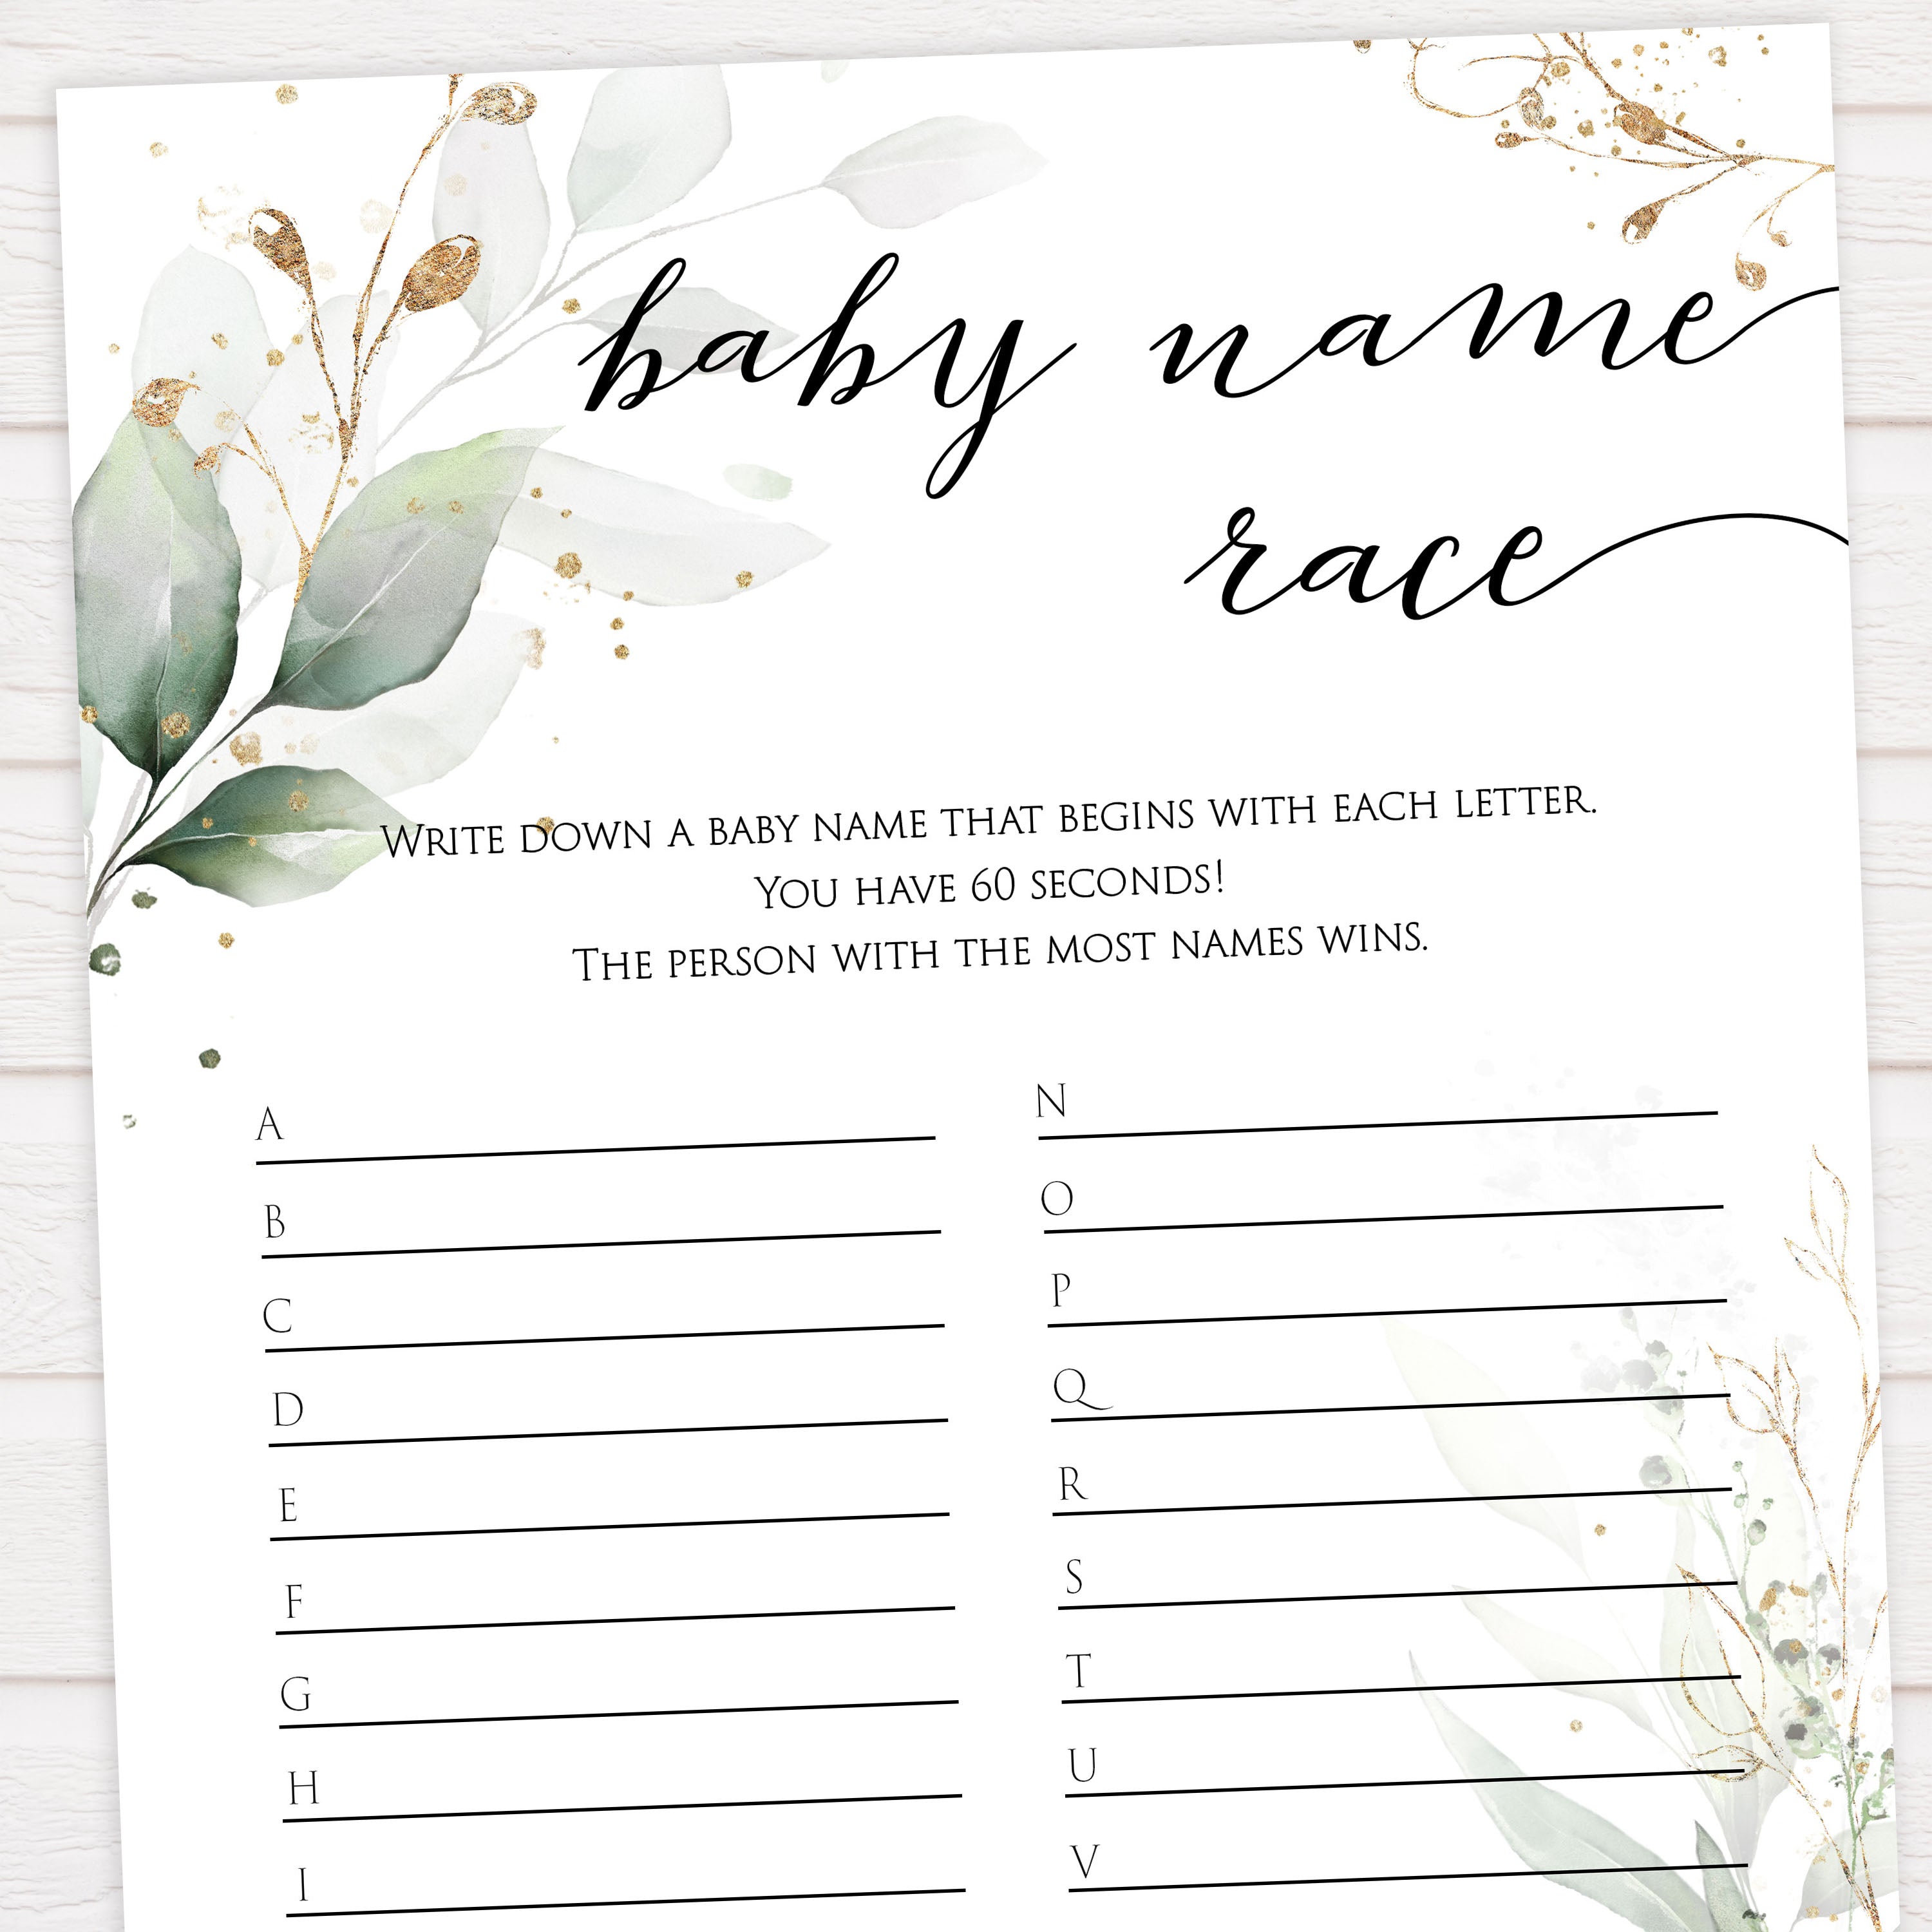 Gold green leaf baby games, baby name race,  printable baby games, fun baby games, top baby games to play, gold leaf baby shower, greenery baby shower ideas